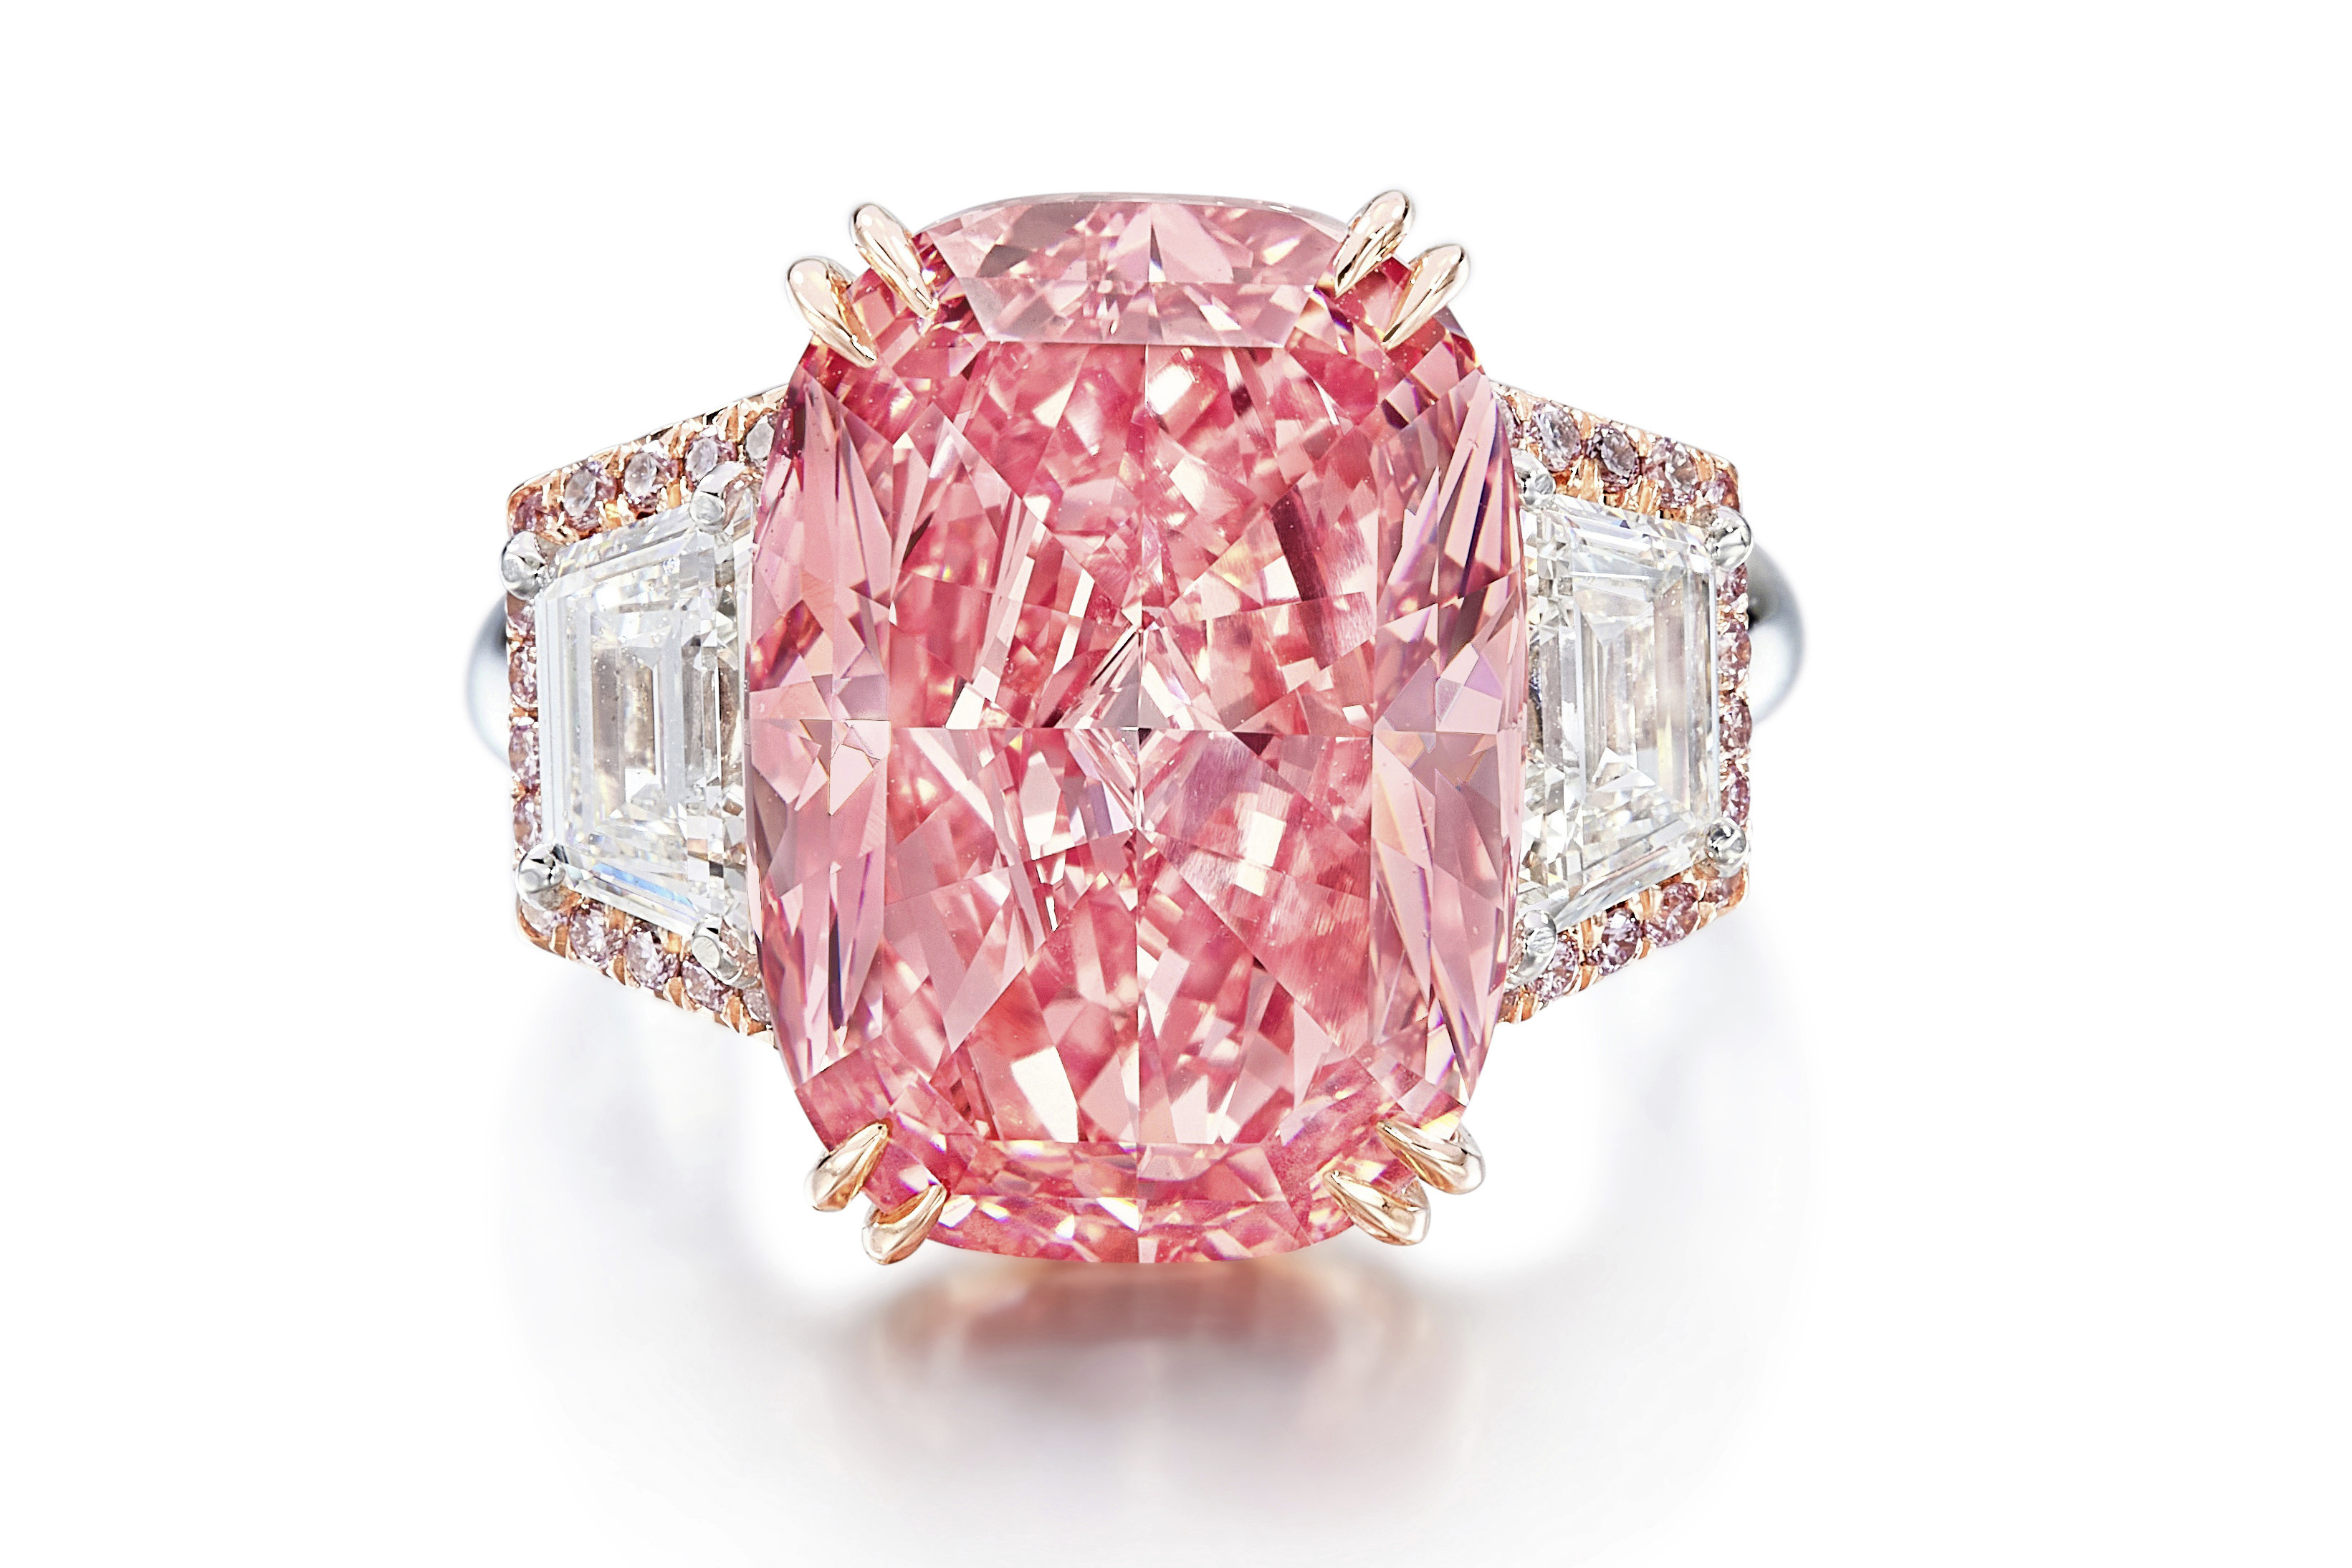 Pink diamond sells for $49.9m, breaks auction record | Business